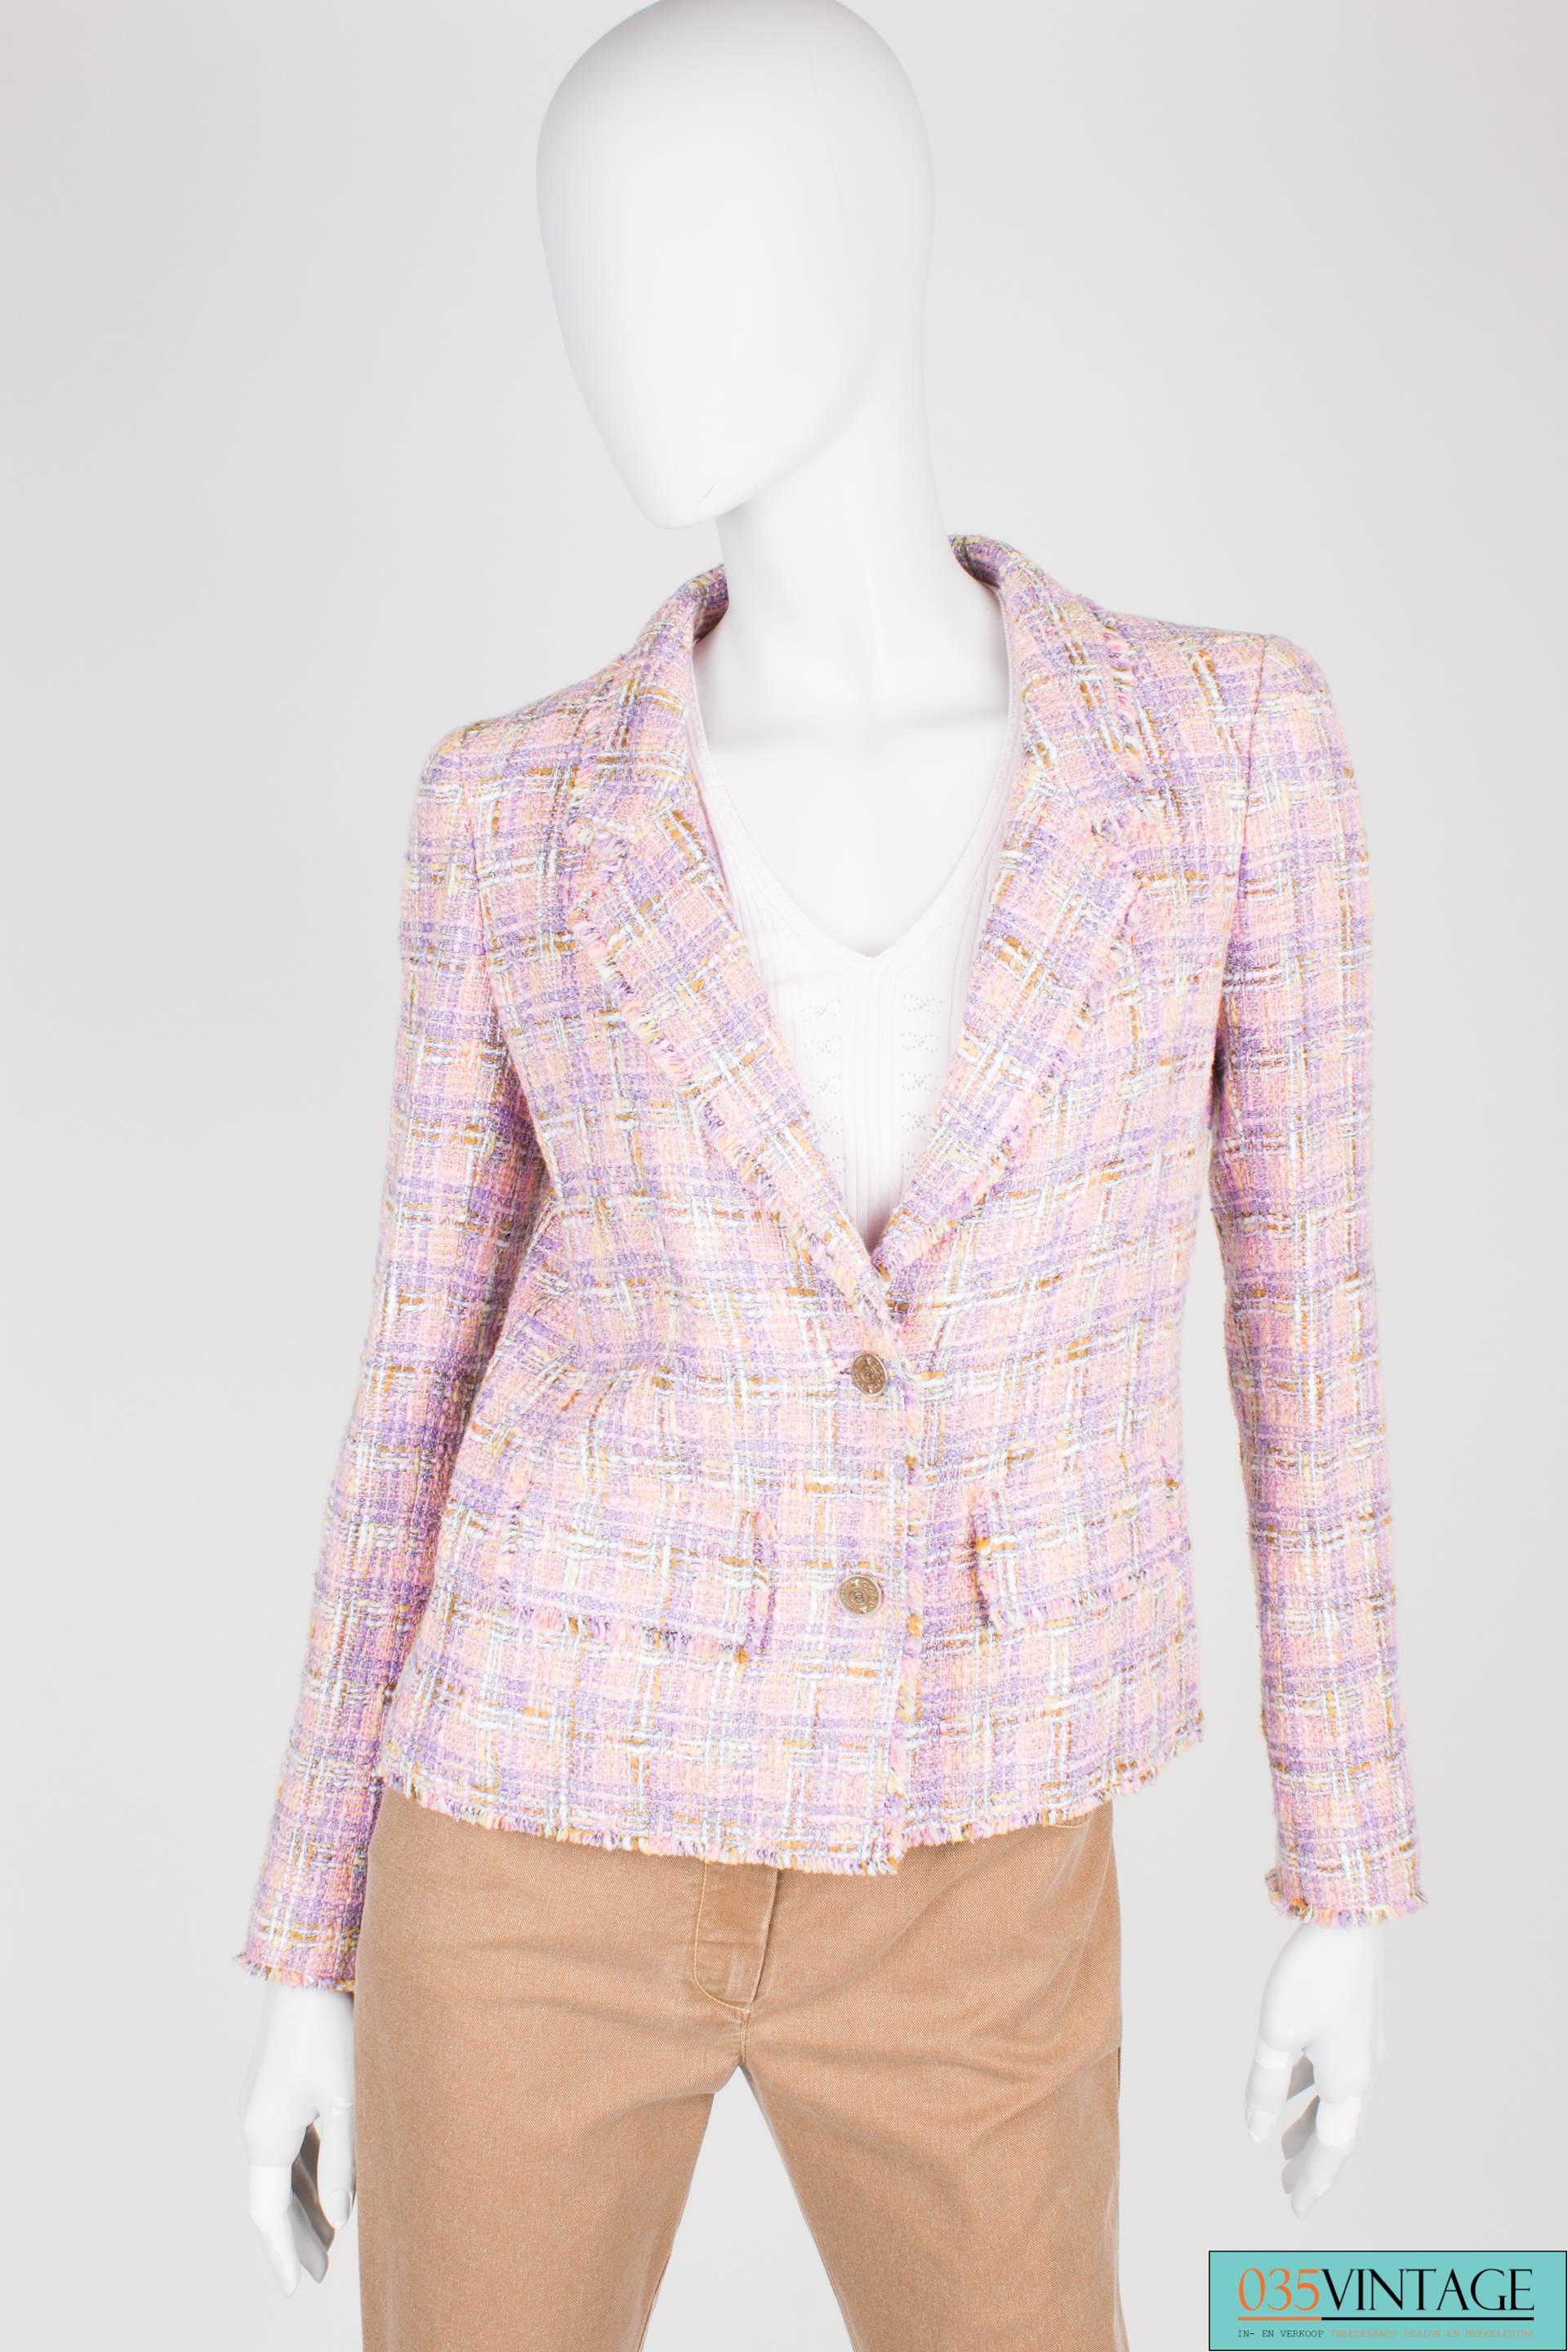 Three piece suit by Chanel; a jacket, pants and top.

The jacket is made of purple, pink, brown and white bouclé. Front closure with two metal buttons, three of these buttons at the end of the sleeves. A little smaller of course. Two flap